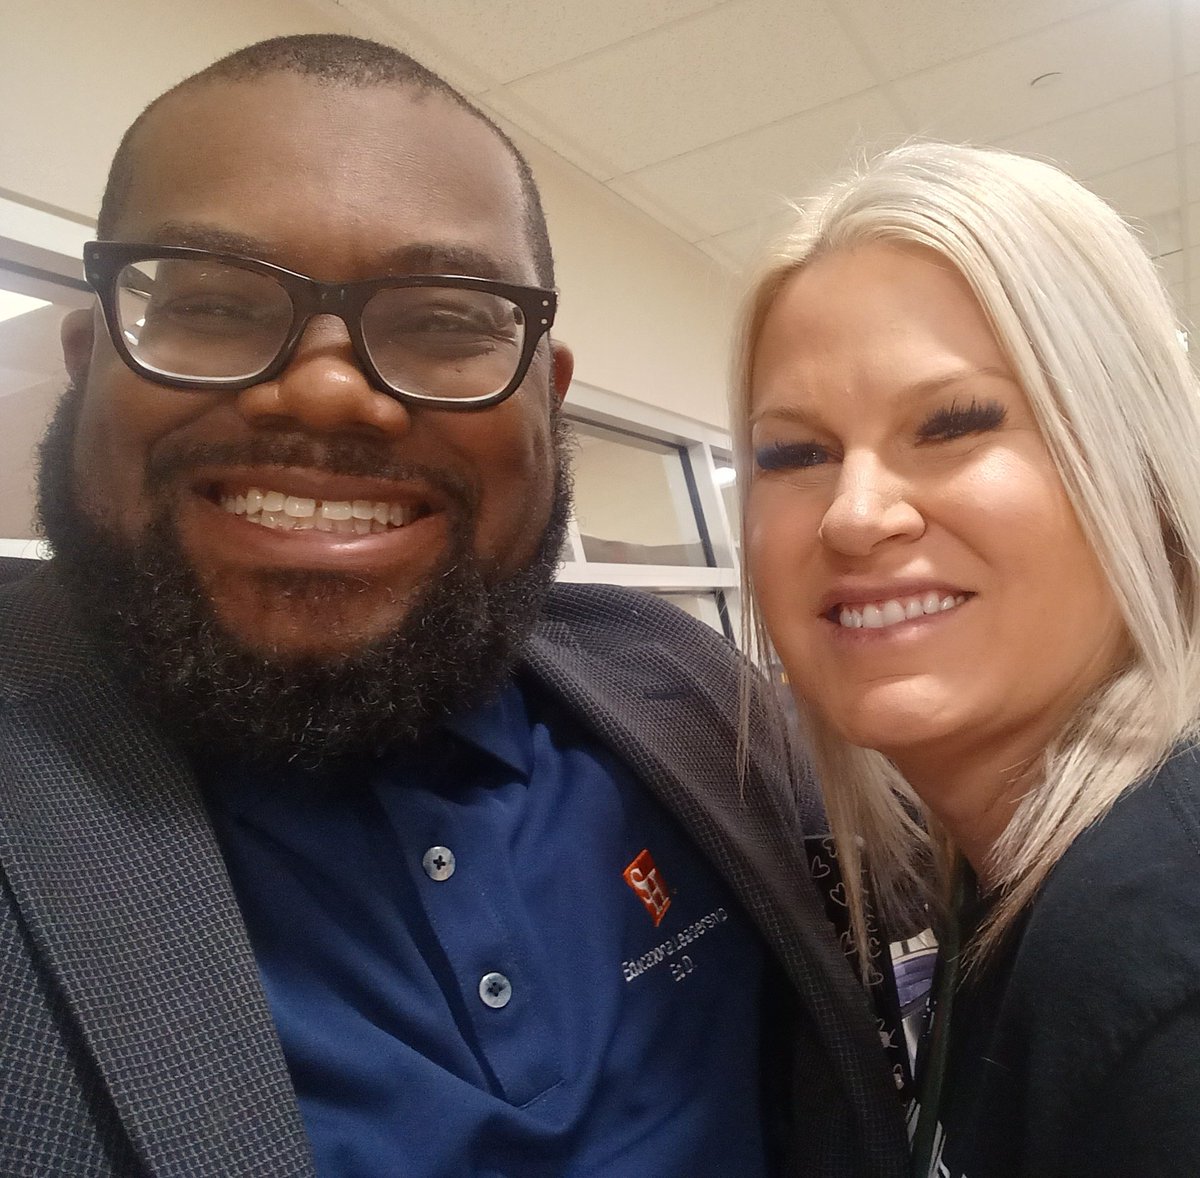 Thanks to everyone for the love, but I specifically want to thank mi hermano @eric_betancourt, my wonderful boss @KAndersonEduc8, & my entire C&I family! It's always blessing to serve when you love who you serve!  @SpringISD_Super @SISD_CoA @LaTracyHarrisa